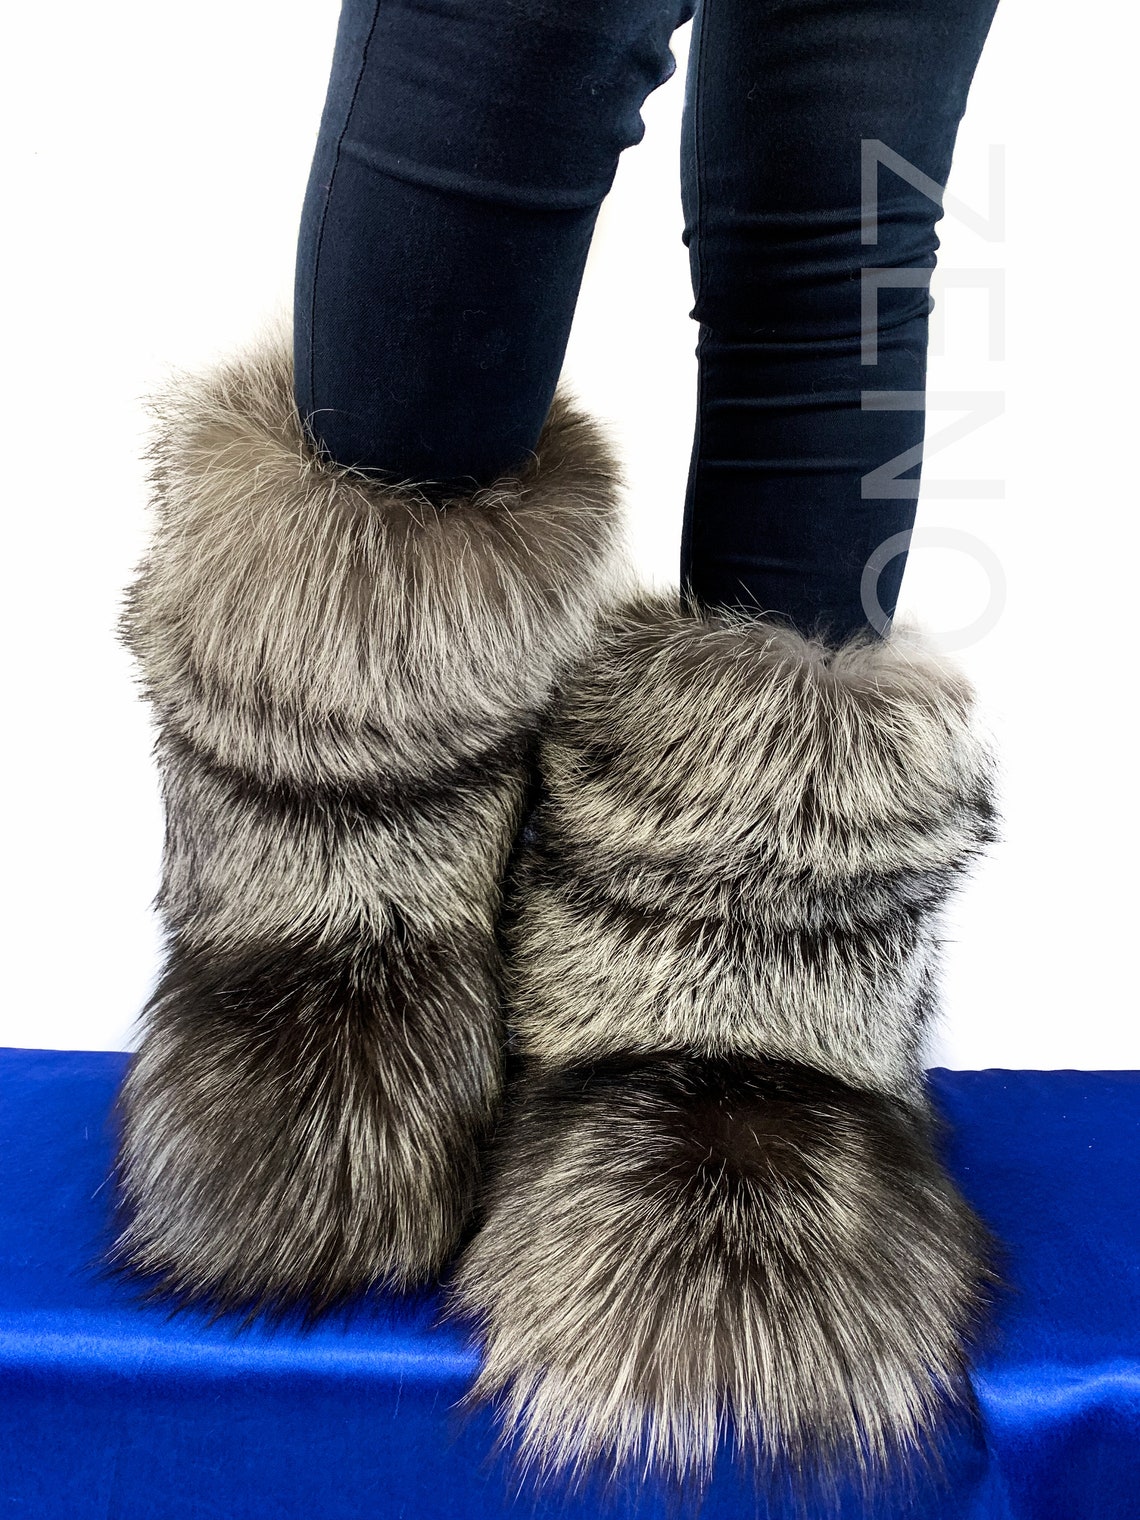 Double-Sided Silver Fox Fur Boots For Outdoor Arctic Boots | Etsy